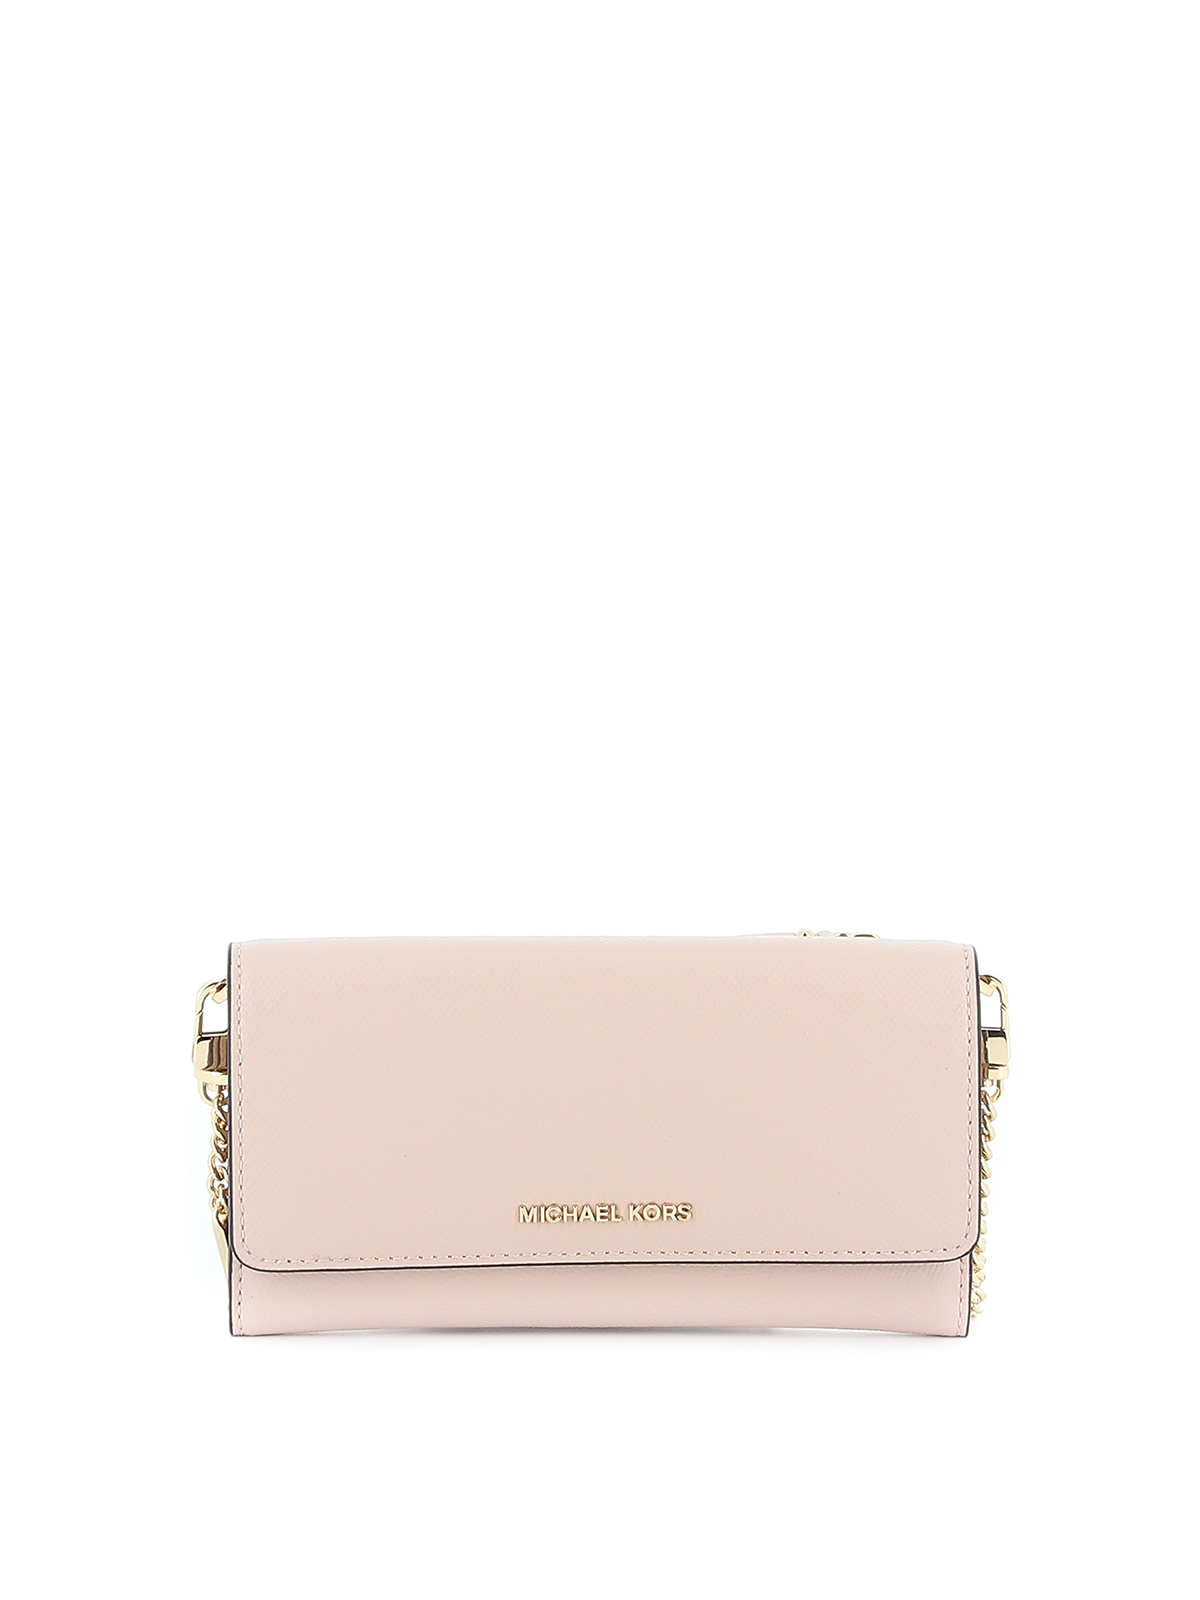 Evakuering Hobart Tahiti Michael Kors Leather Wallet With Chain Strap In Pink | ModeSens